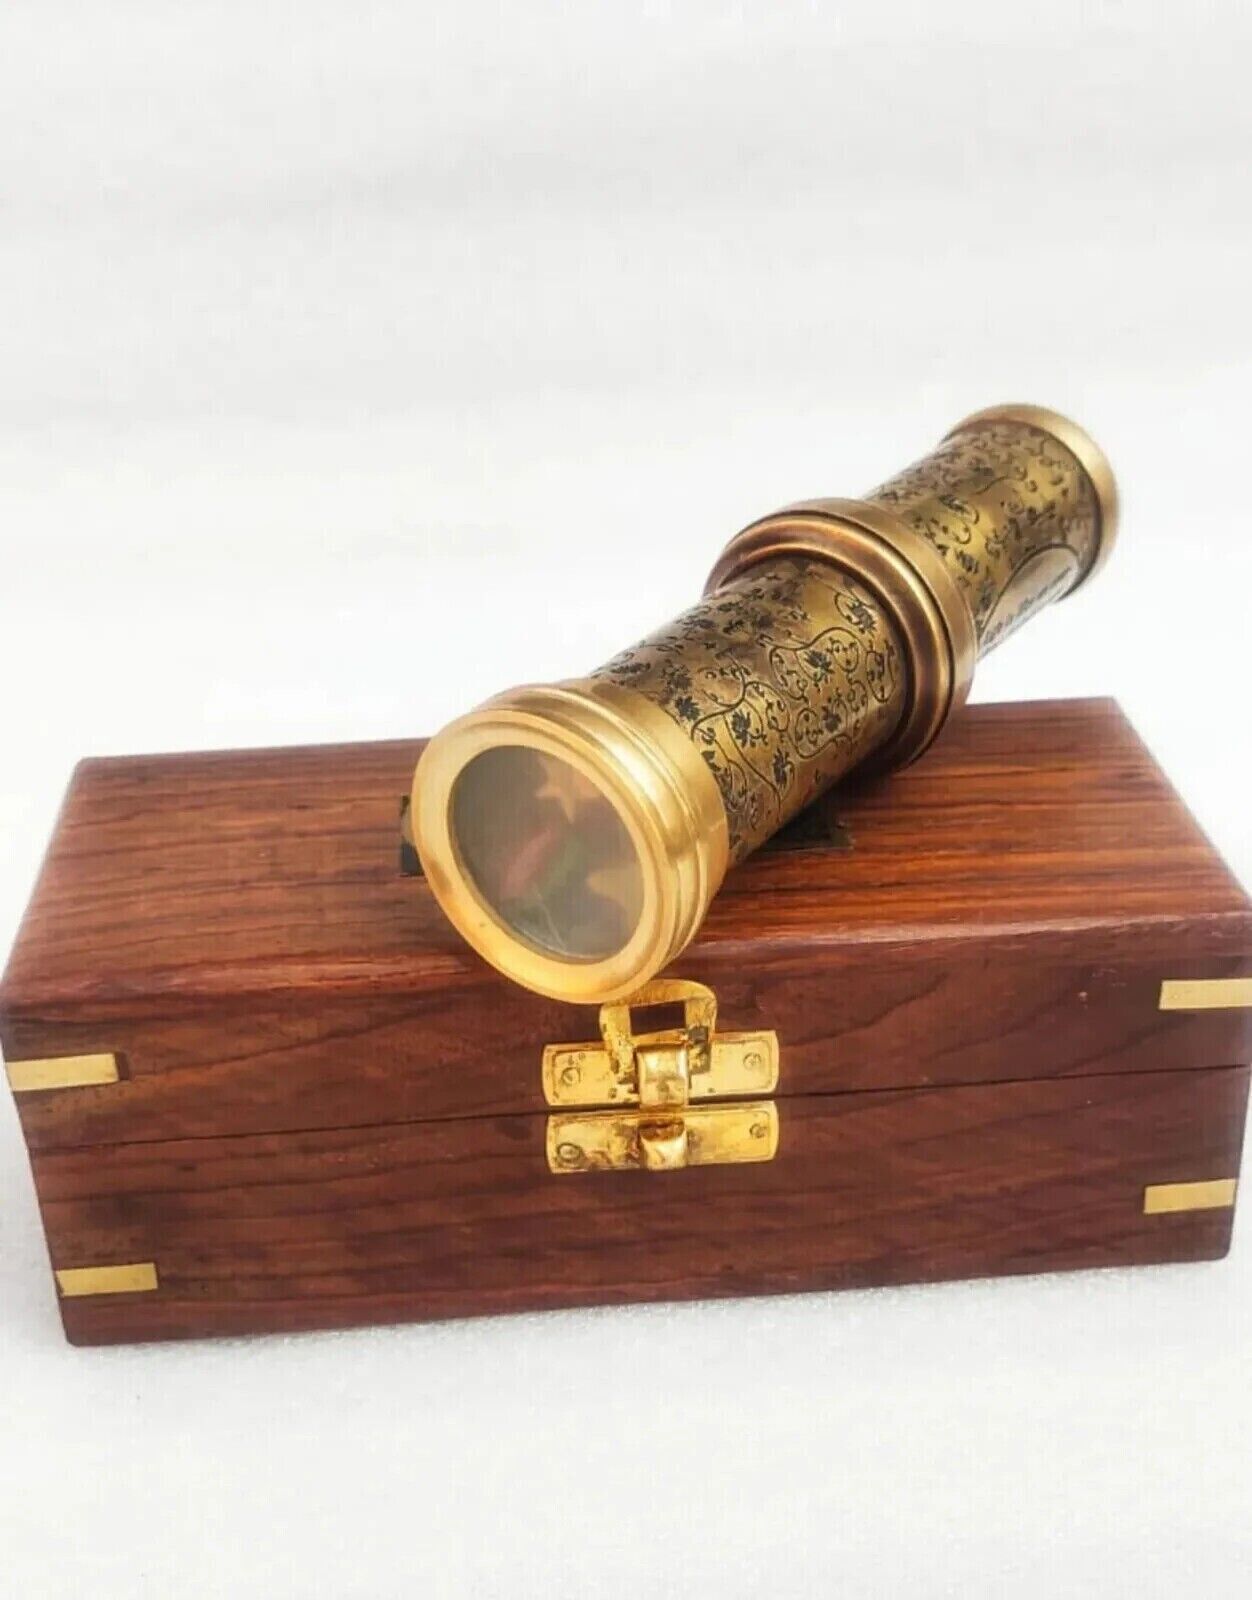 Vintage Style Brass Nautical Kaleidoscope Handle and Wooden Box